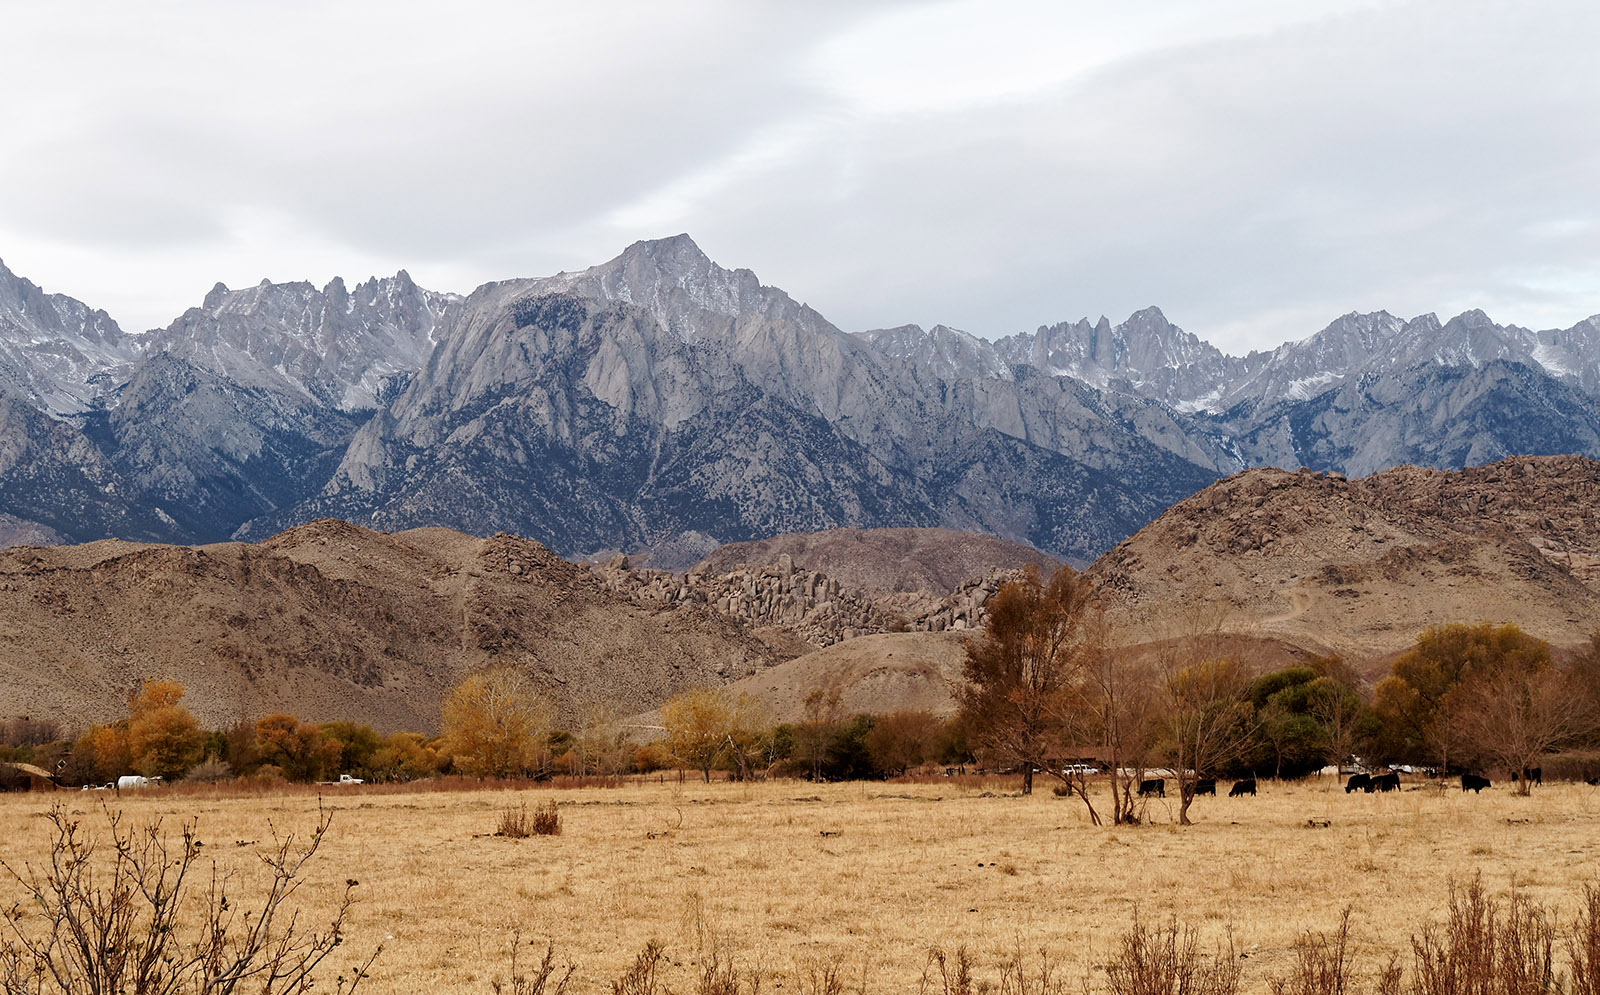 Sierra Nevada and Alabama foothills at Lone Pine CA.   Mount Whitney is the sawtooth peak right of center.